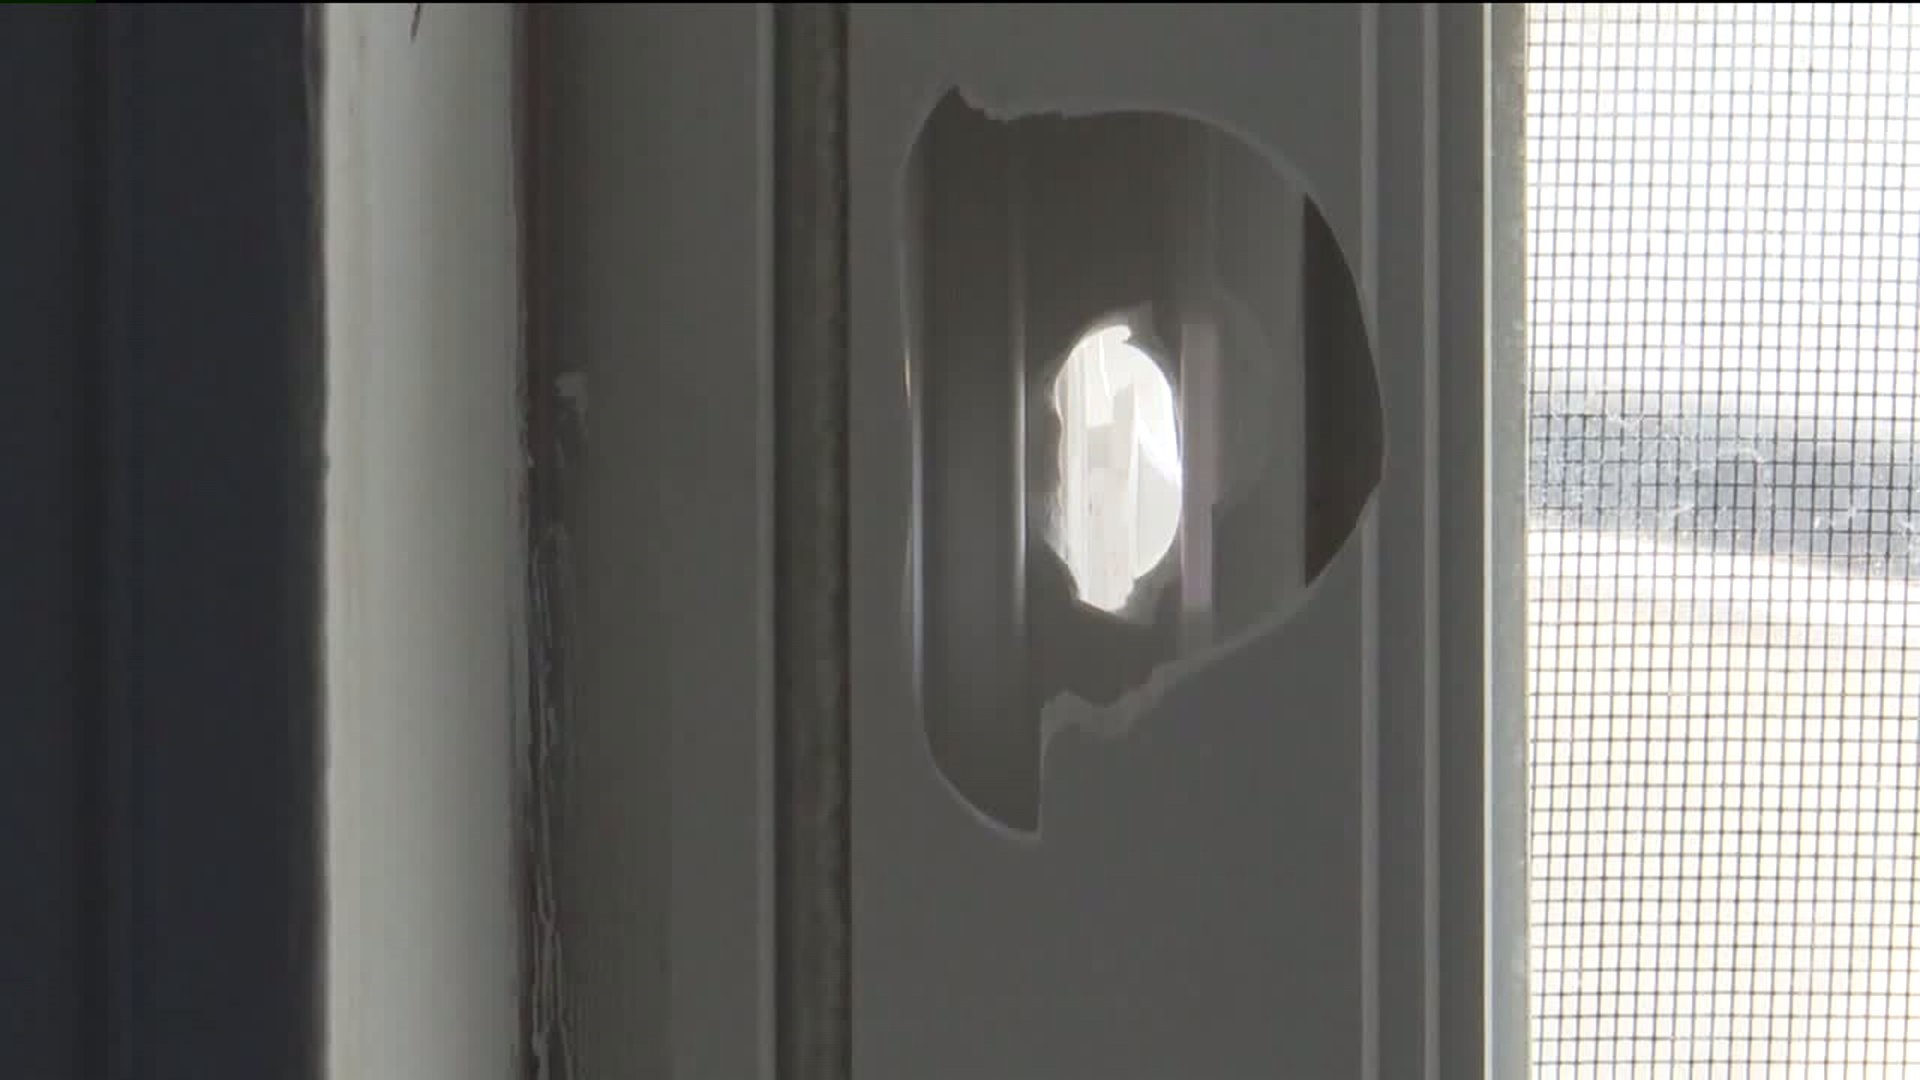 Police: Man Surrenders After Accidentally Firing Stray Bullet Into Home